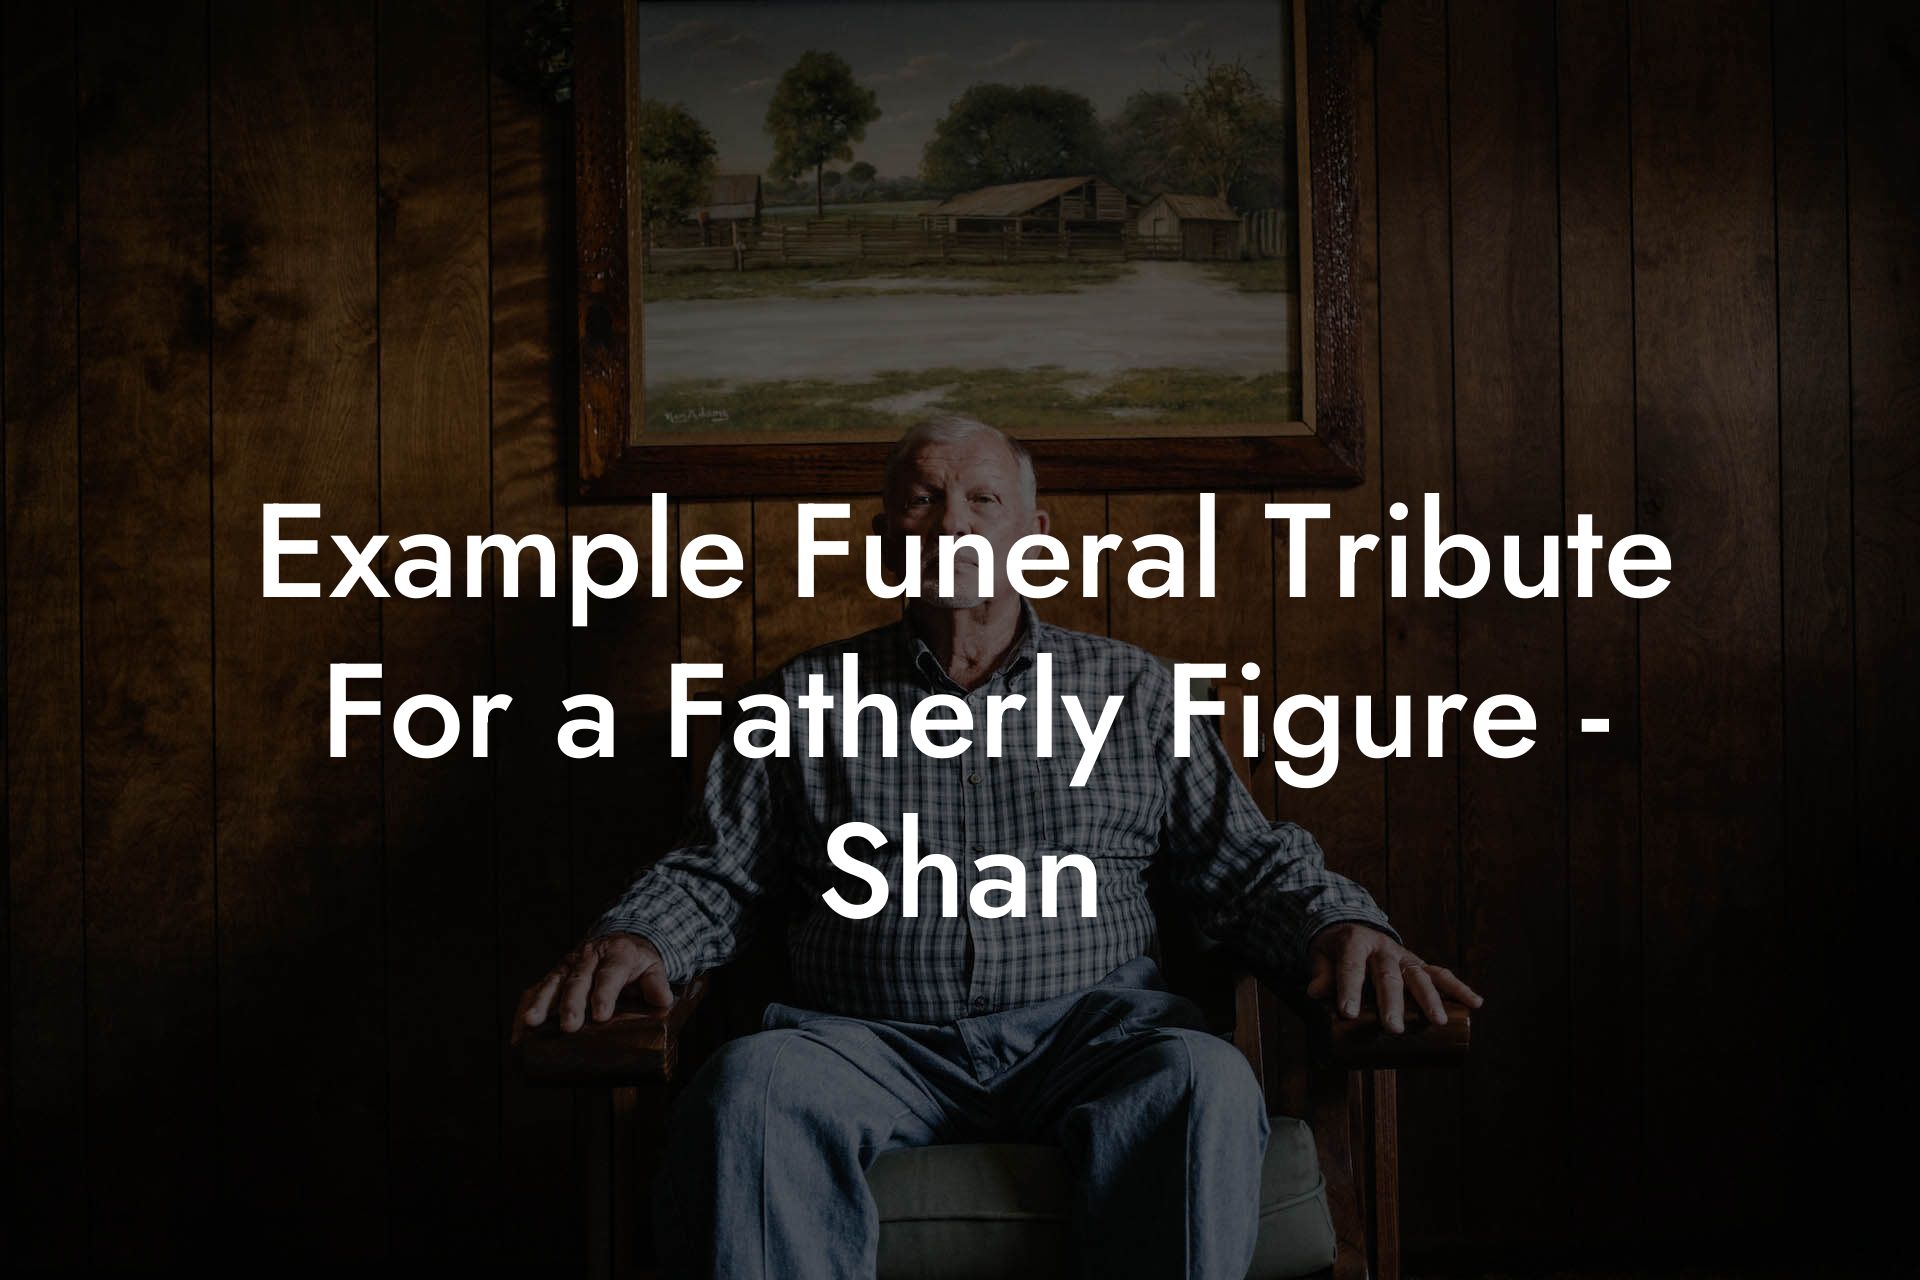 Example Funeral Tribute For a Fatherly Figure - Shan